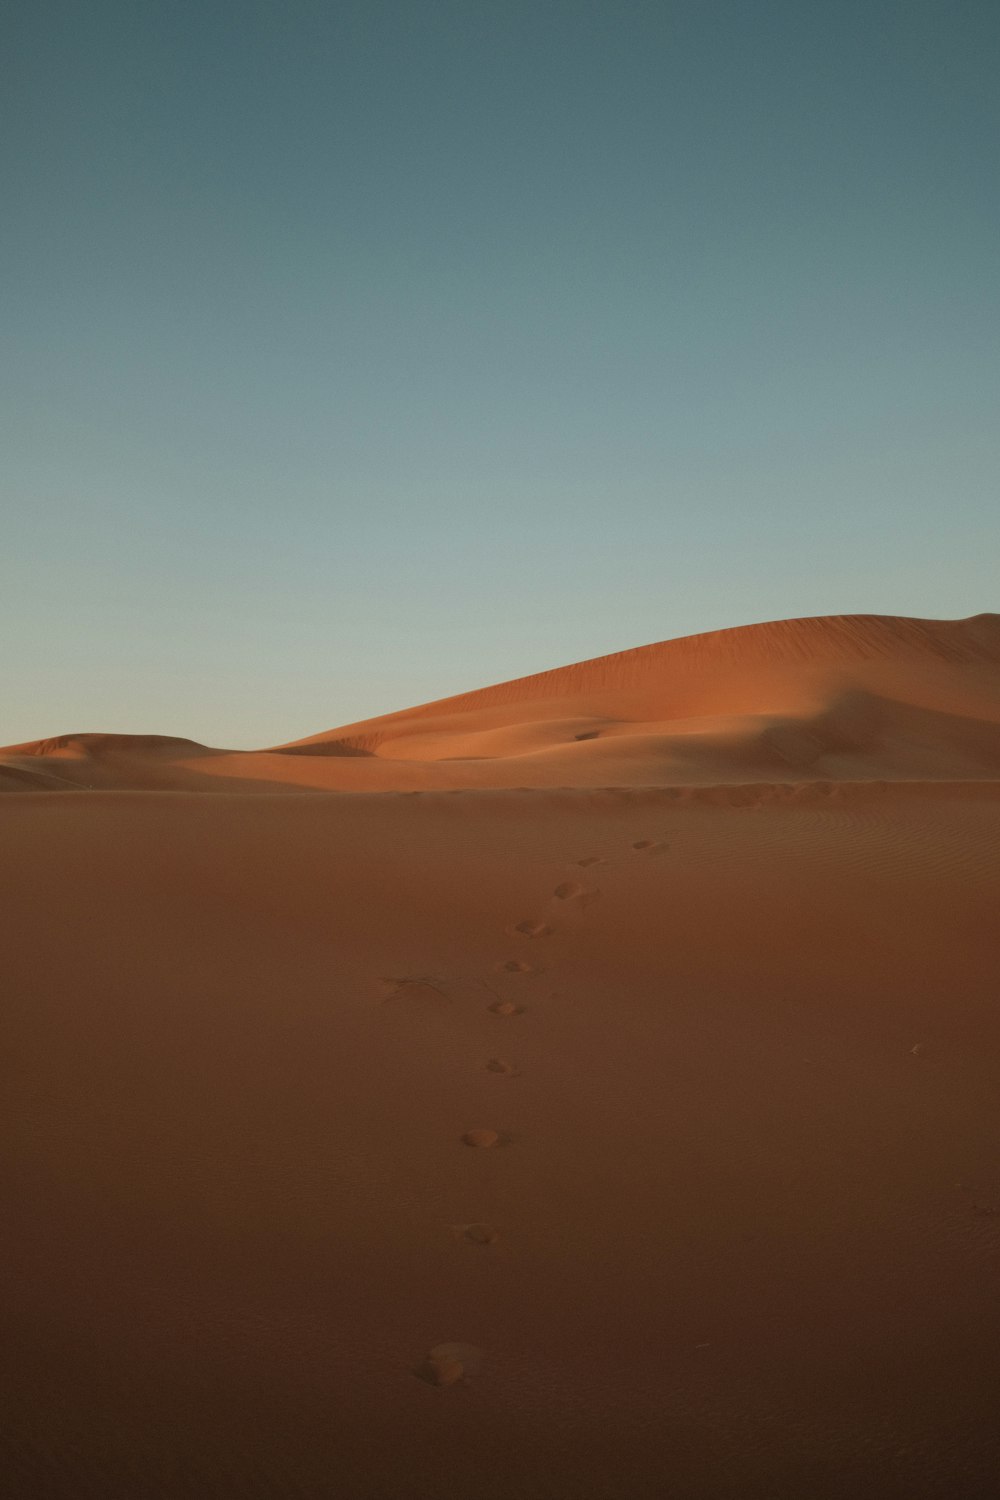 a person walking across a desert with footprints in the sand